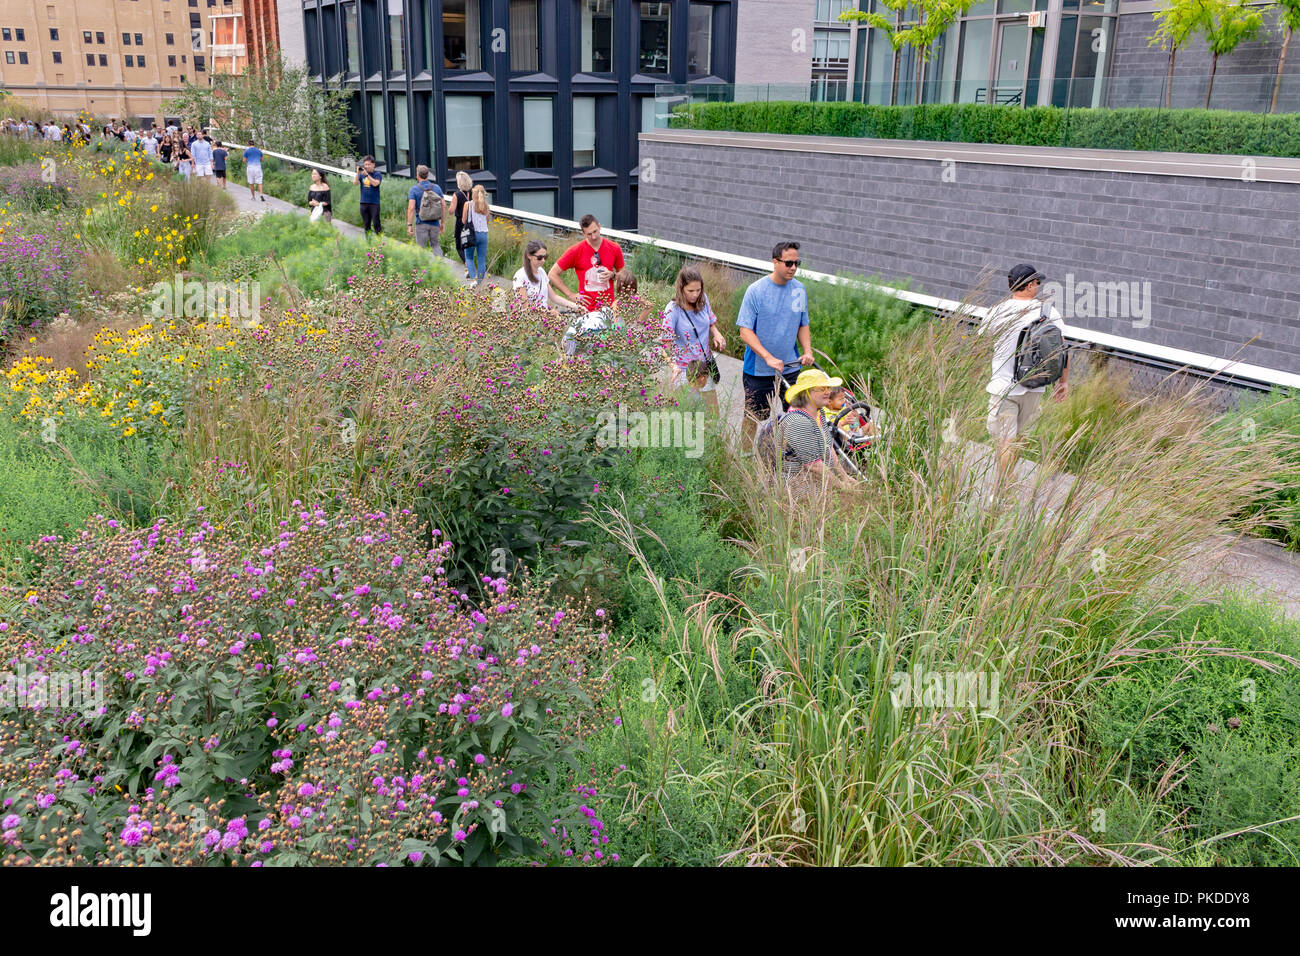 People walking, sitting and enjoying themselves at the New York City High Line Park. Stock Photo